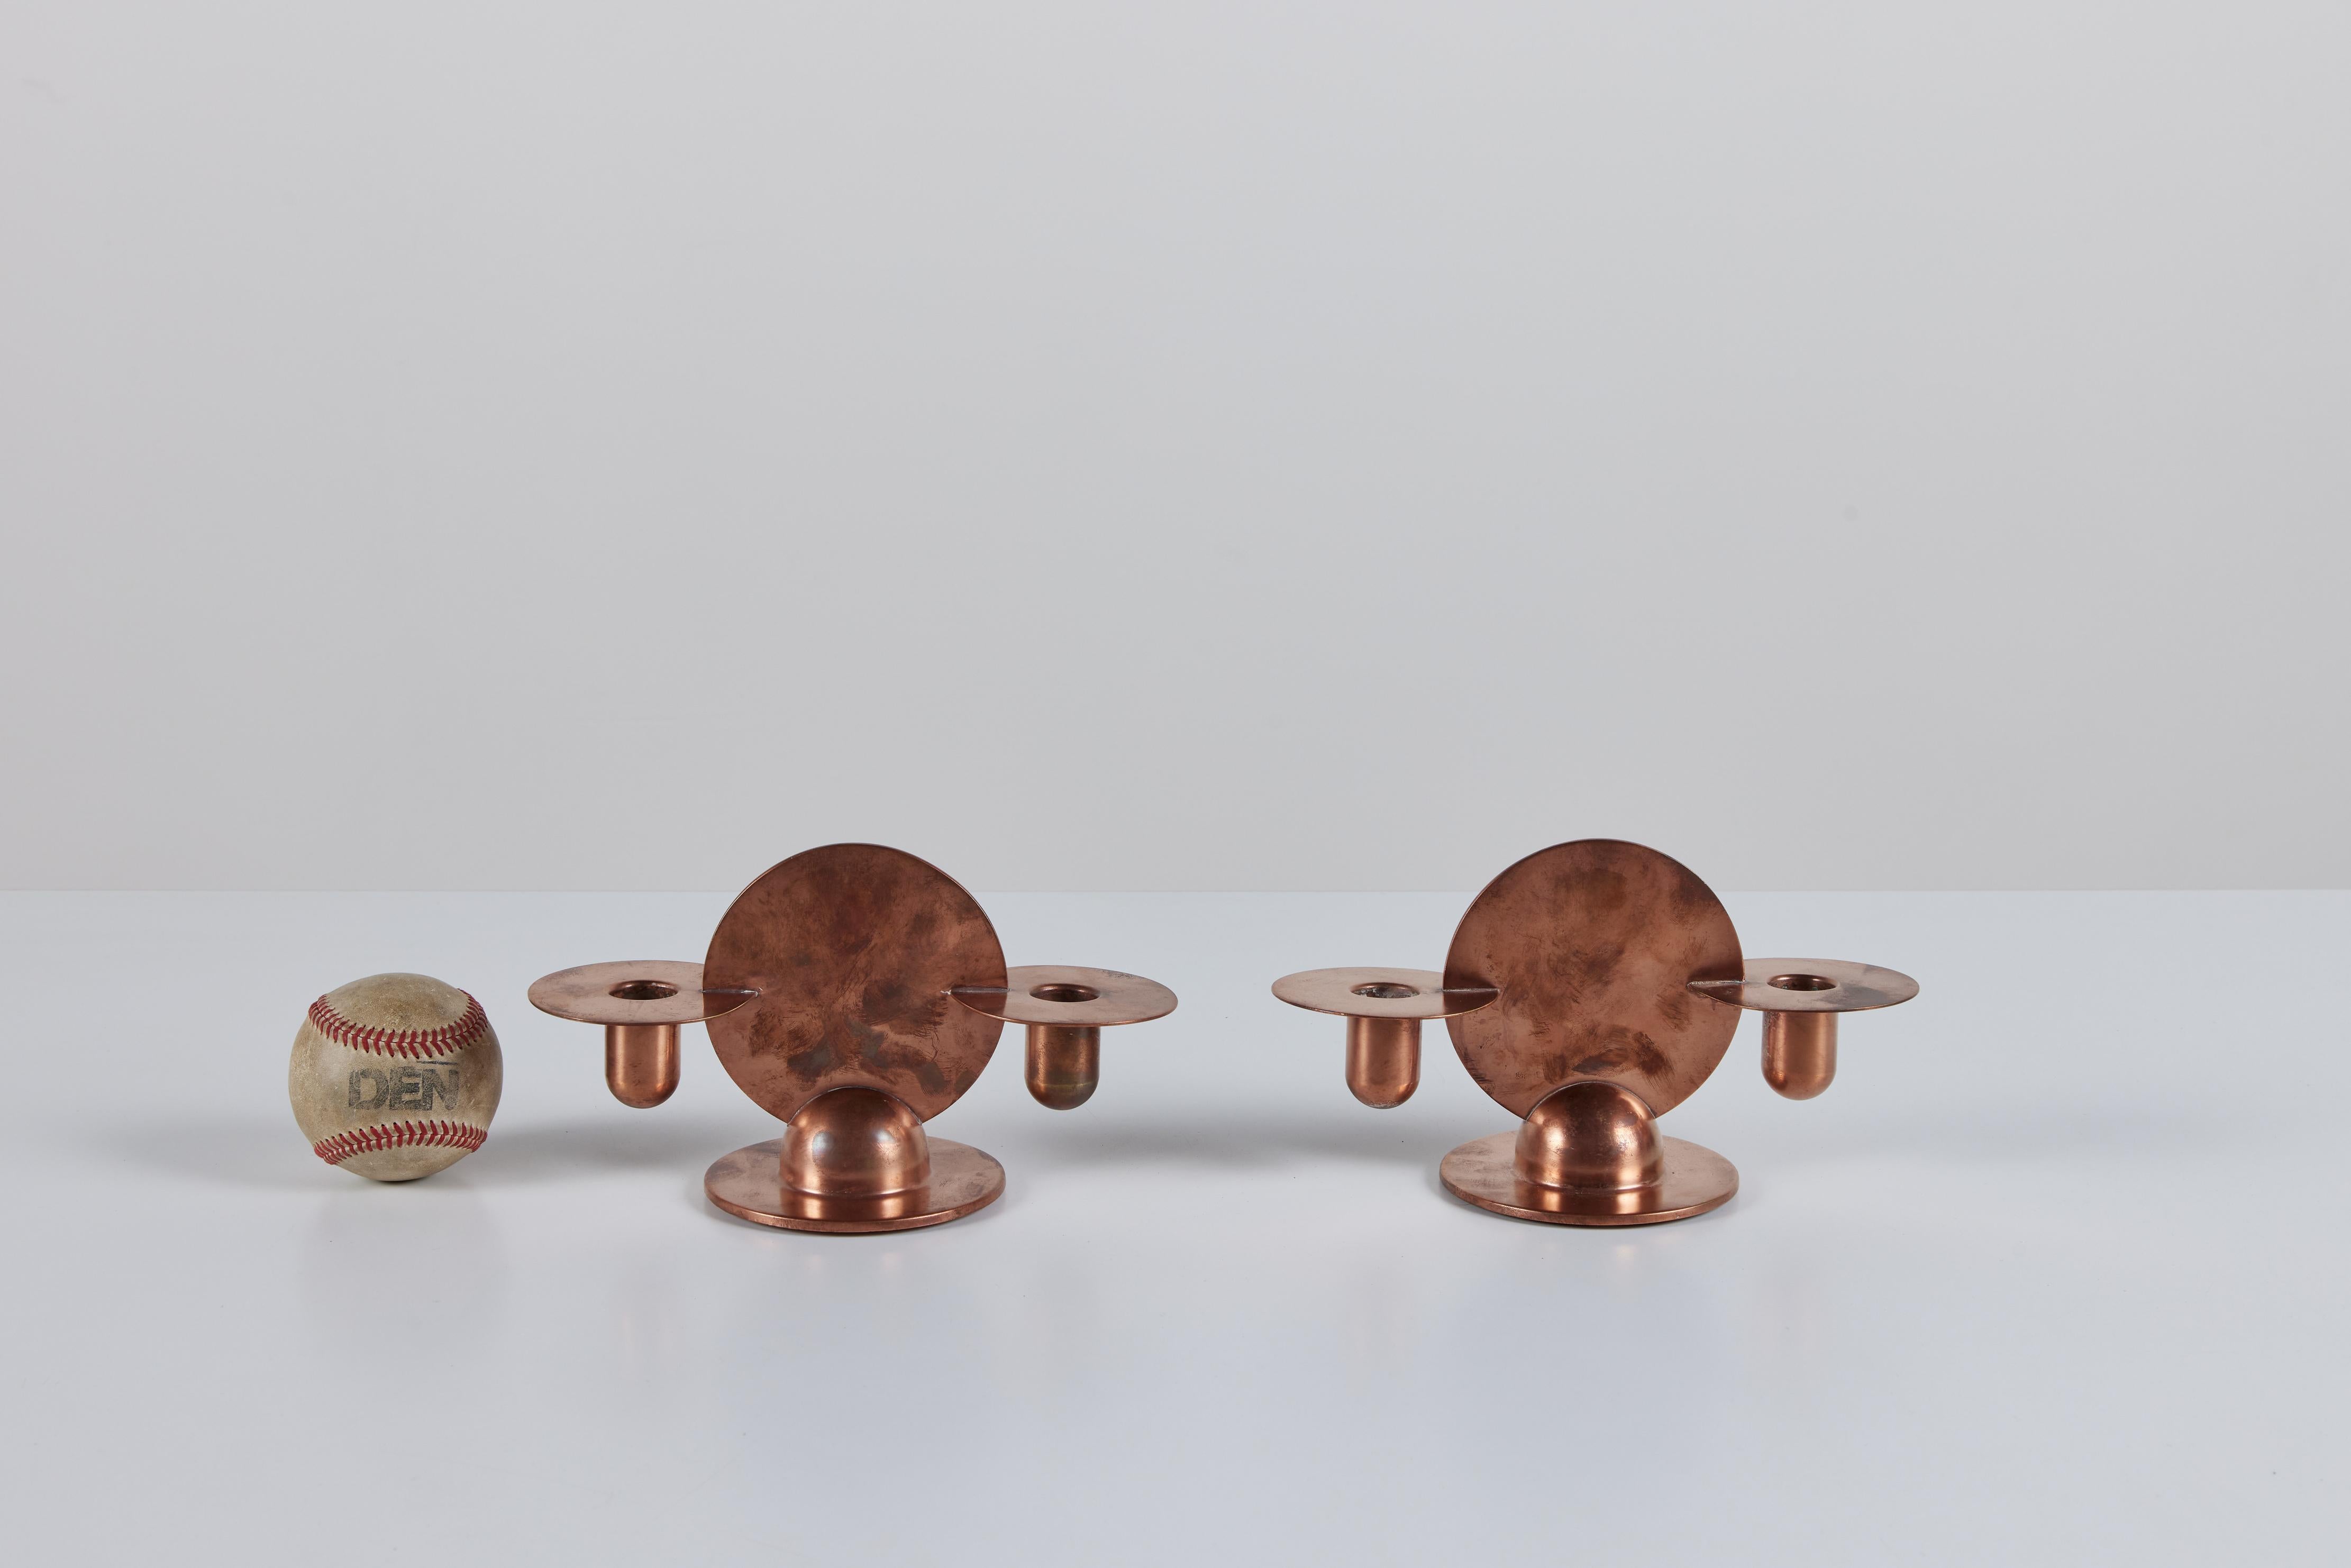 Pair of Copper Candlestick Holders by Walter von Nessen for Chase In Good Condition For Sale In Los Angeles, CA